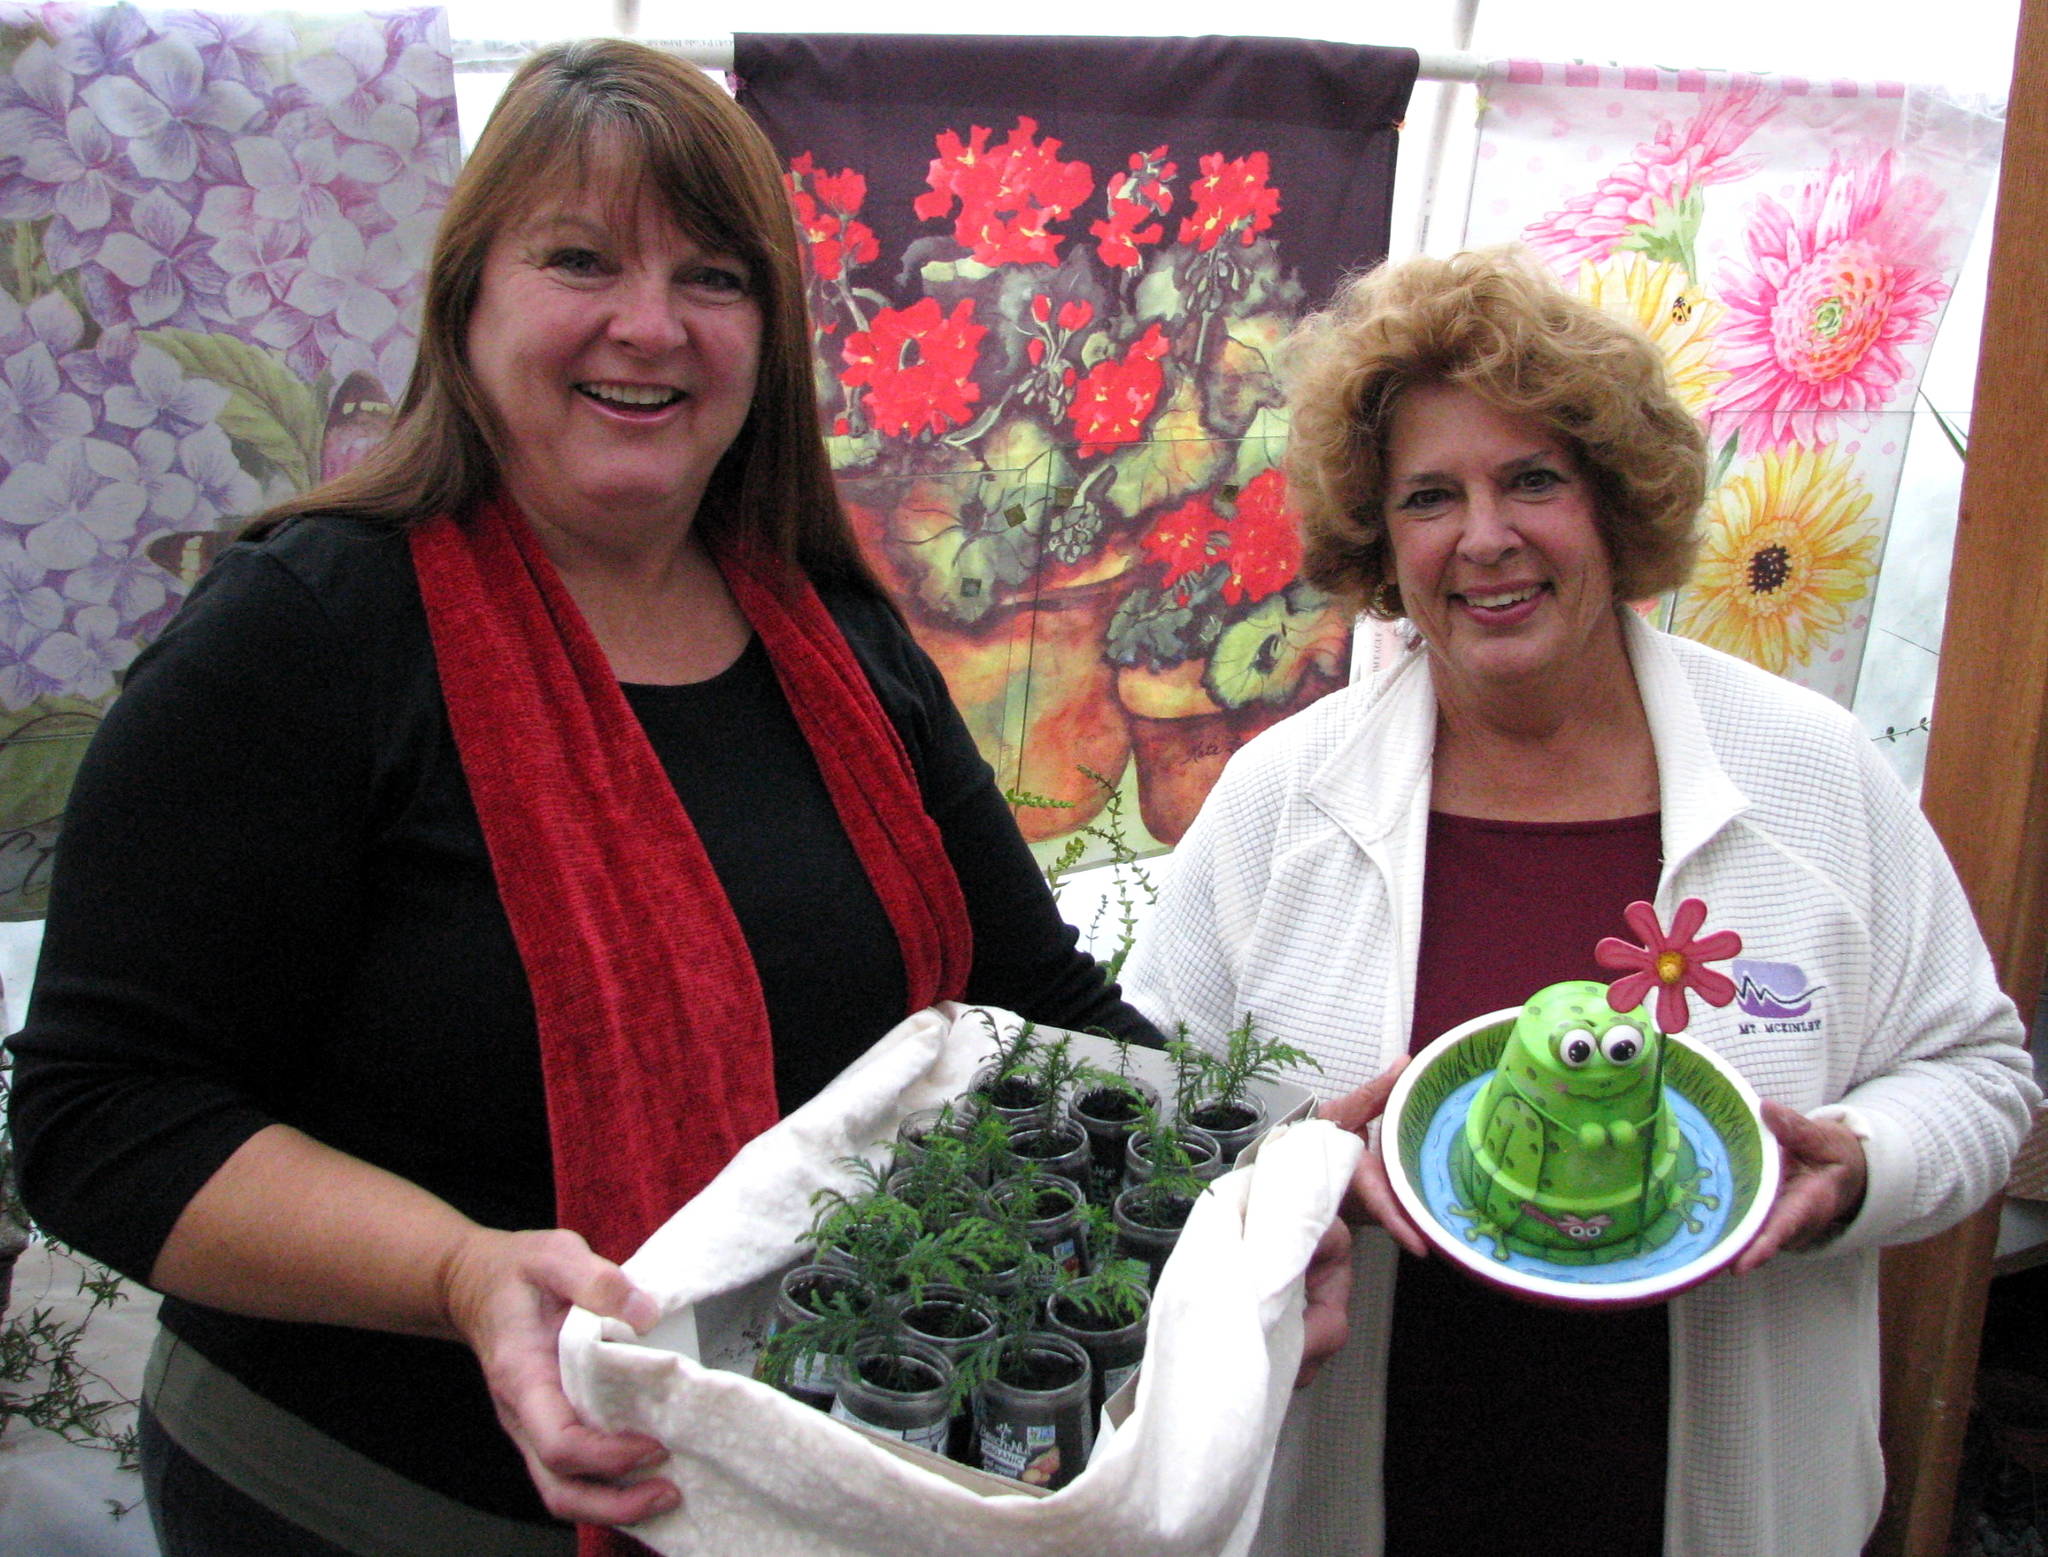 From left, Tanya Unruh and Marilynn Elliott will present “Holiday Décor and Gifts from the Garden” at noon Thursday in the county commissioners’ meeting room (160) at the Clallam County Courthouse, 223 E. Fourth St.